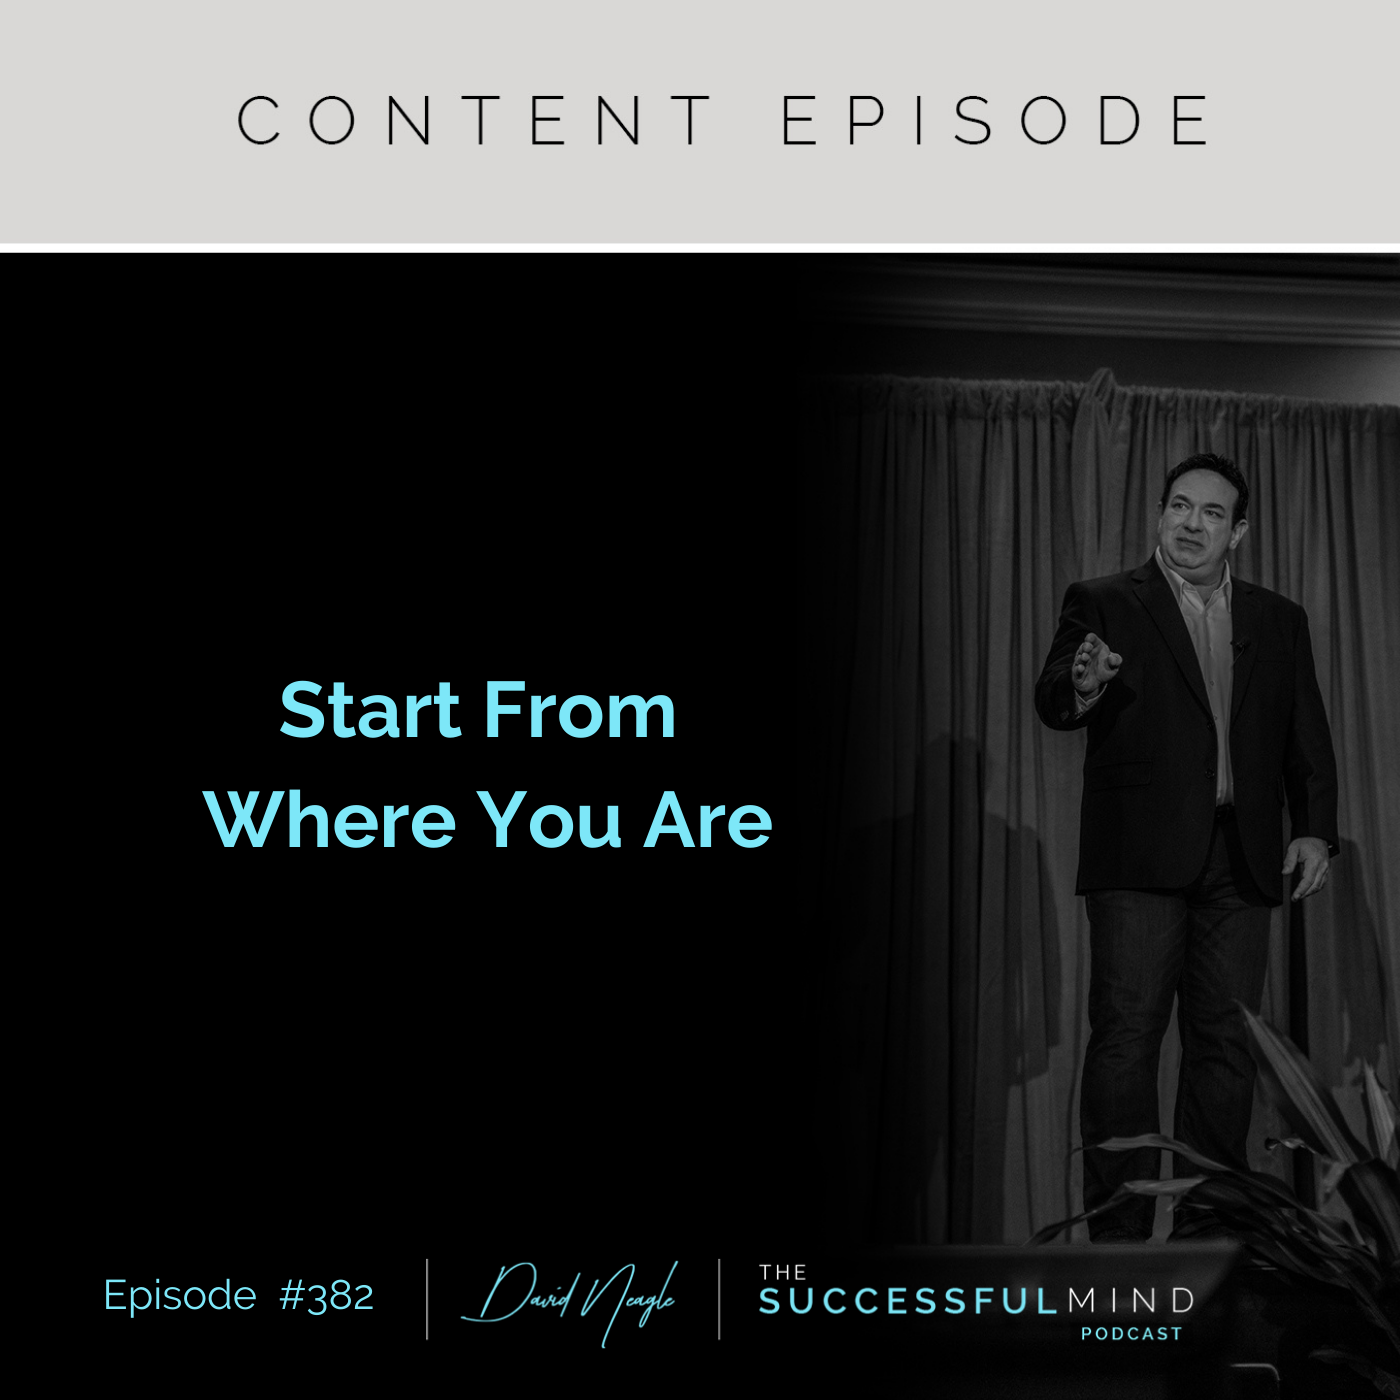 The Successful Mind Podcast - Episode 382 - Start From Where You Are